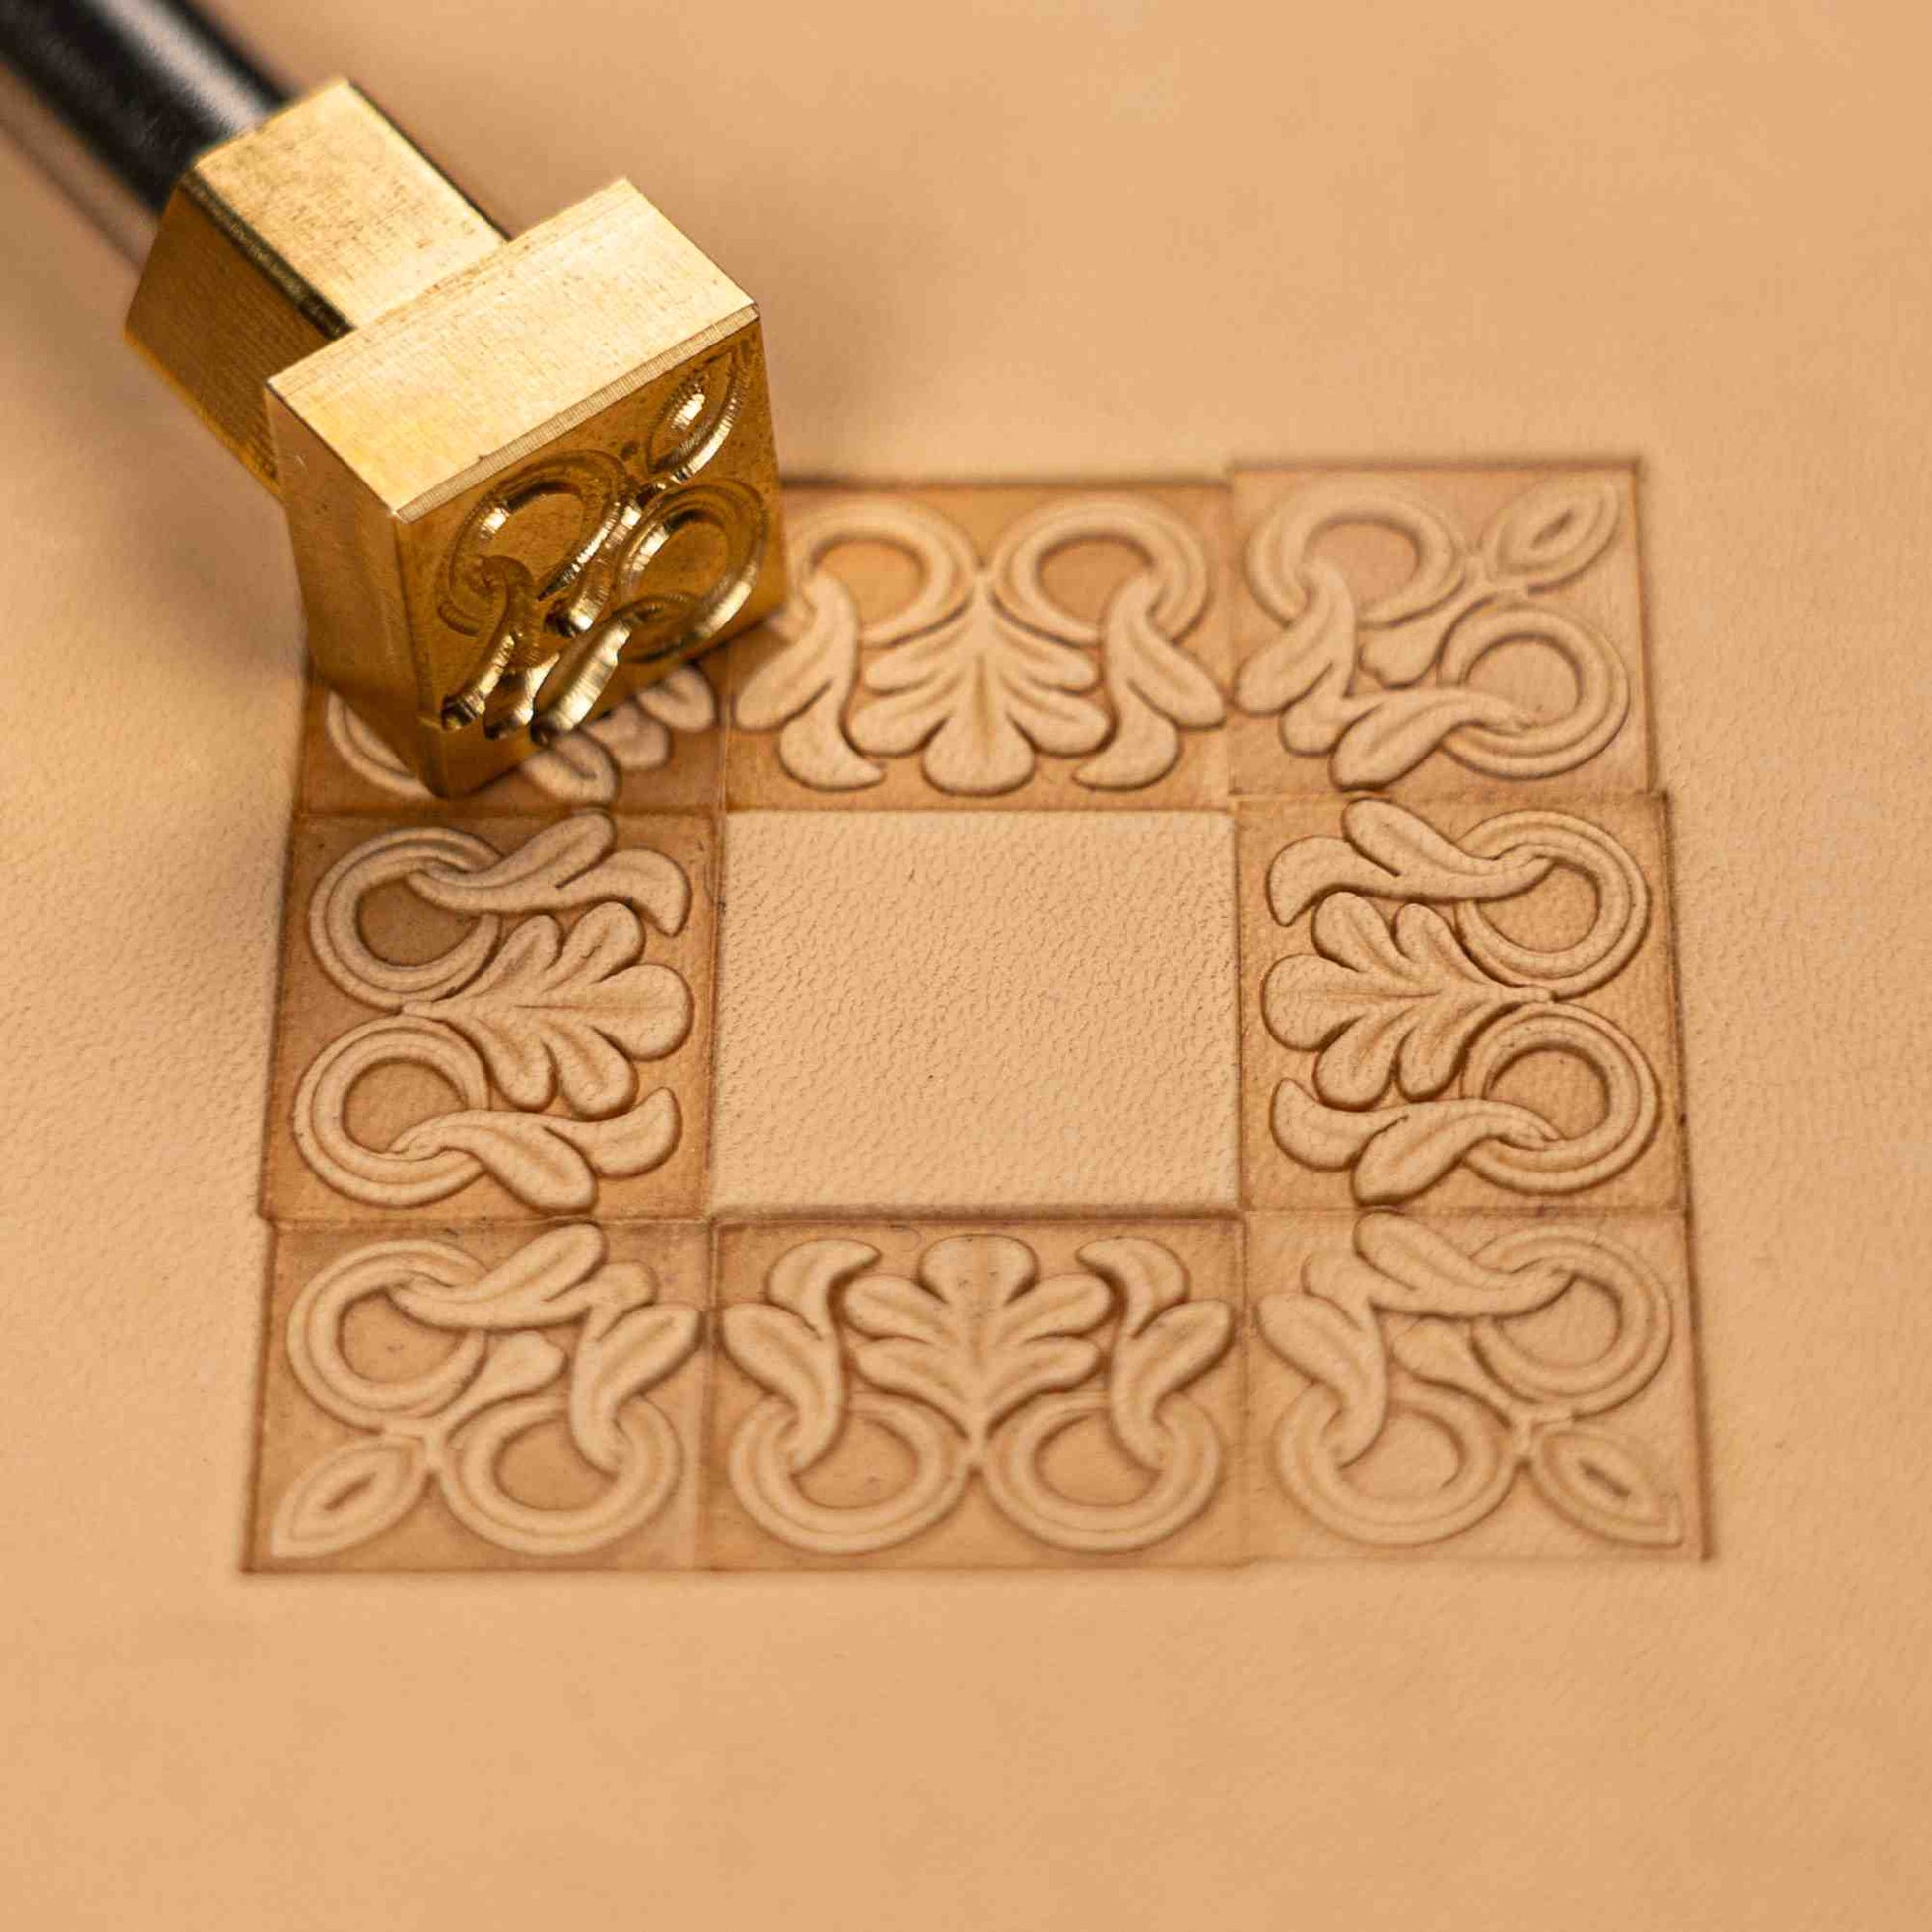 Design Art Stamp-leather Working Patterns Saddle Making Tools, Carving  Leather Craft Stamps Tools,leather Stamping Tools Stamping Punches 